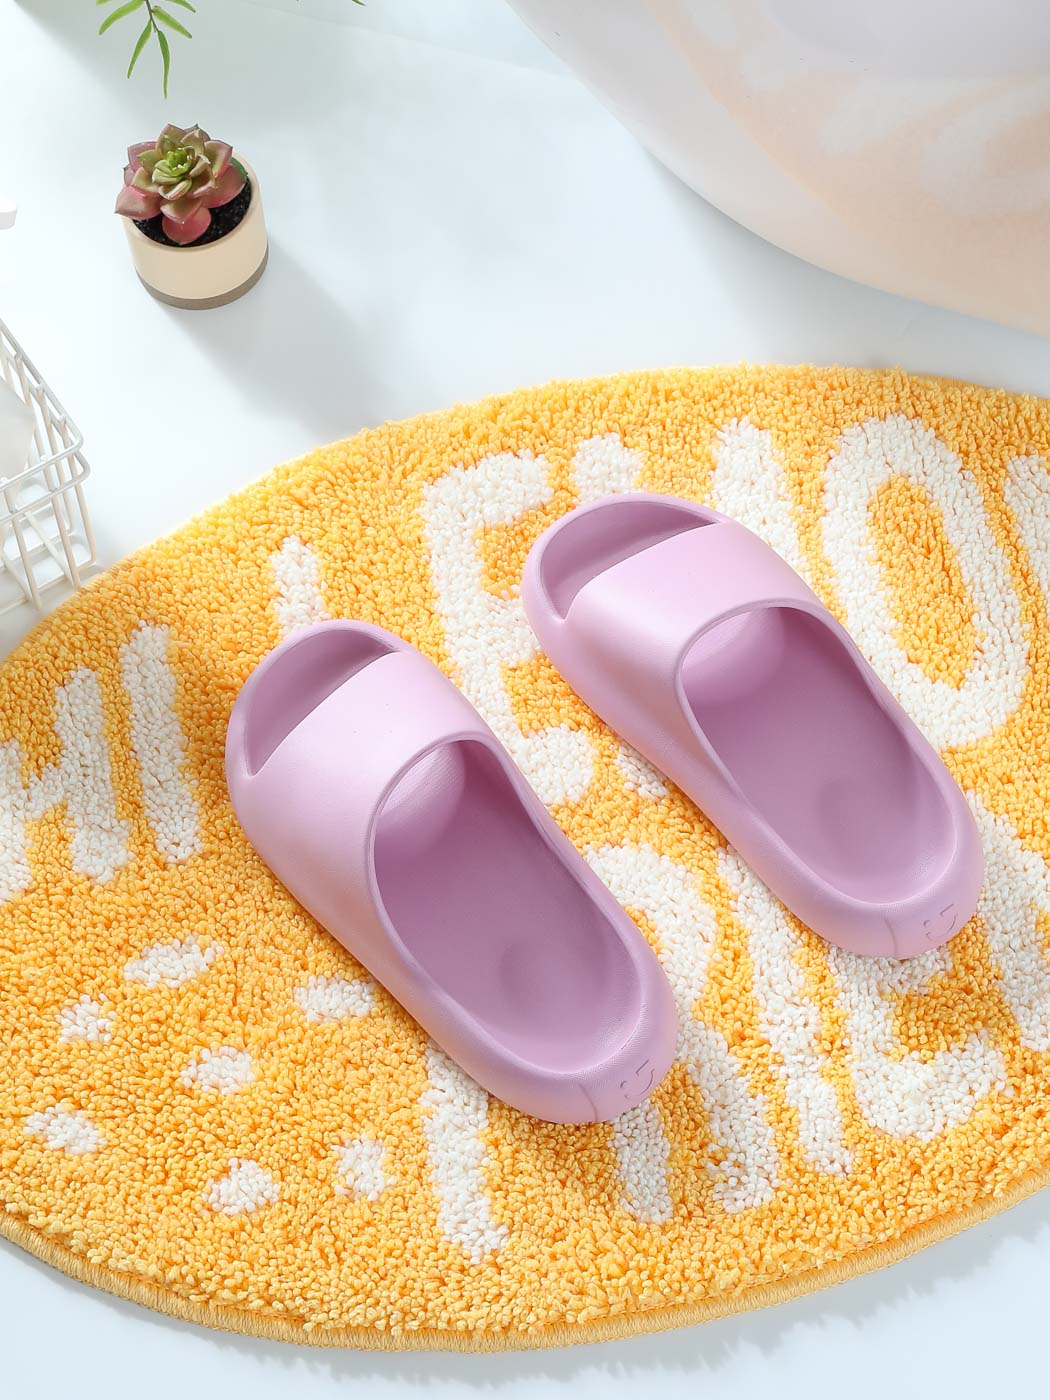 MINISO CANDY COLOR BATH SLIPPERS (39-40,PURPLE) 2012604521179 BATHROOM SLIPPERS